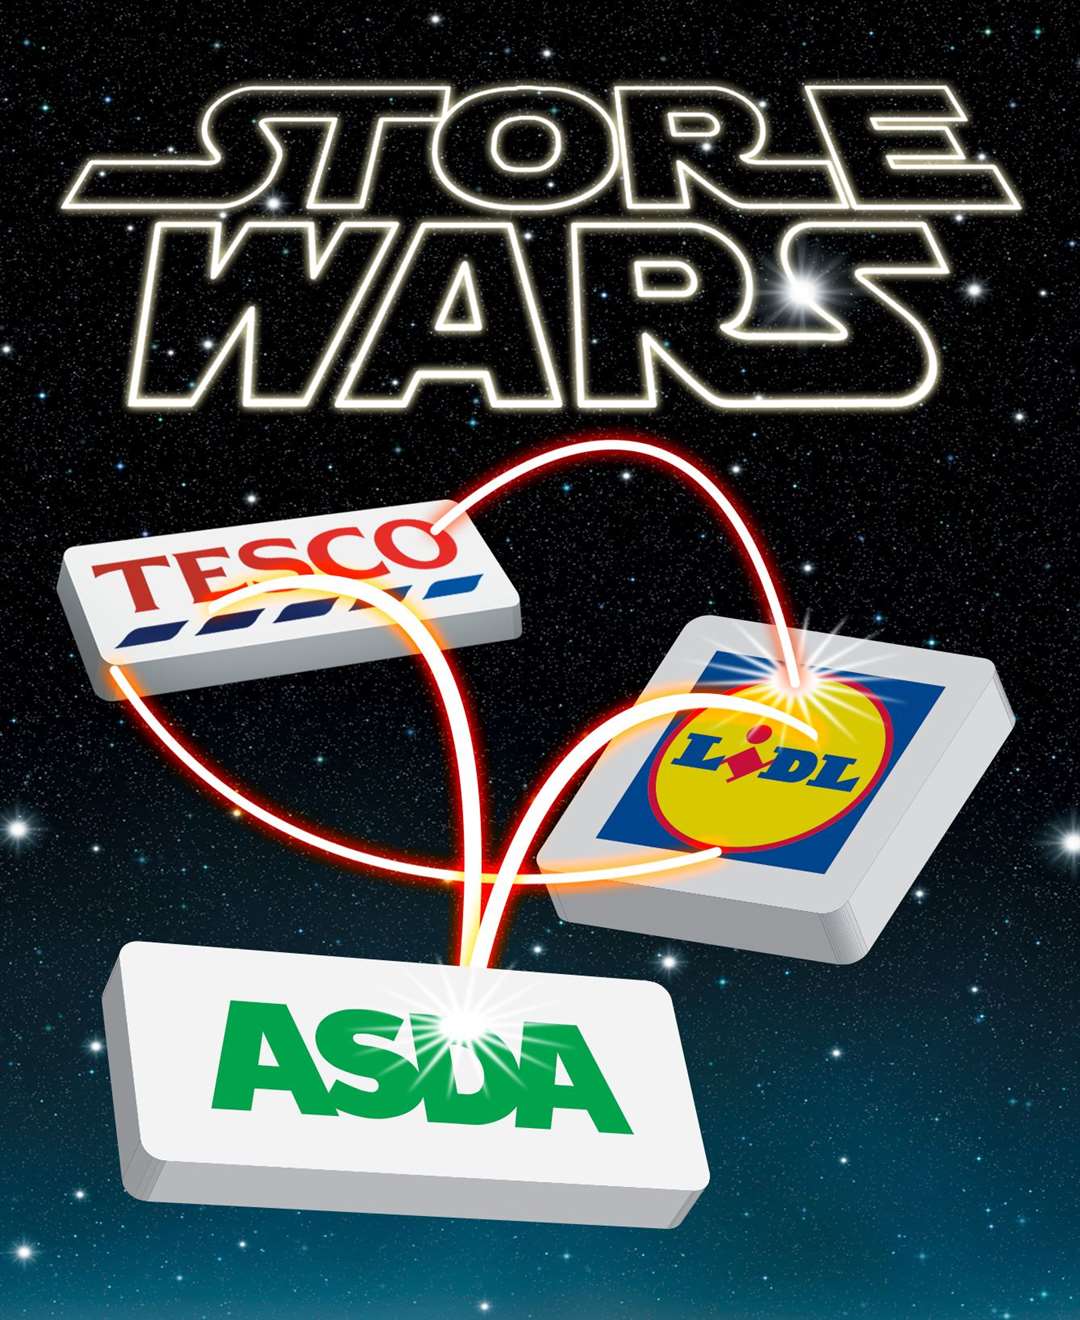 Asda and Tesco both objected